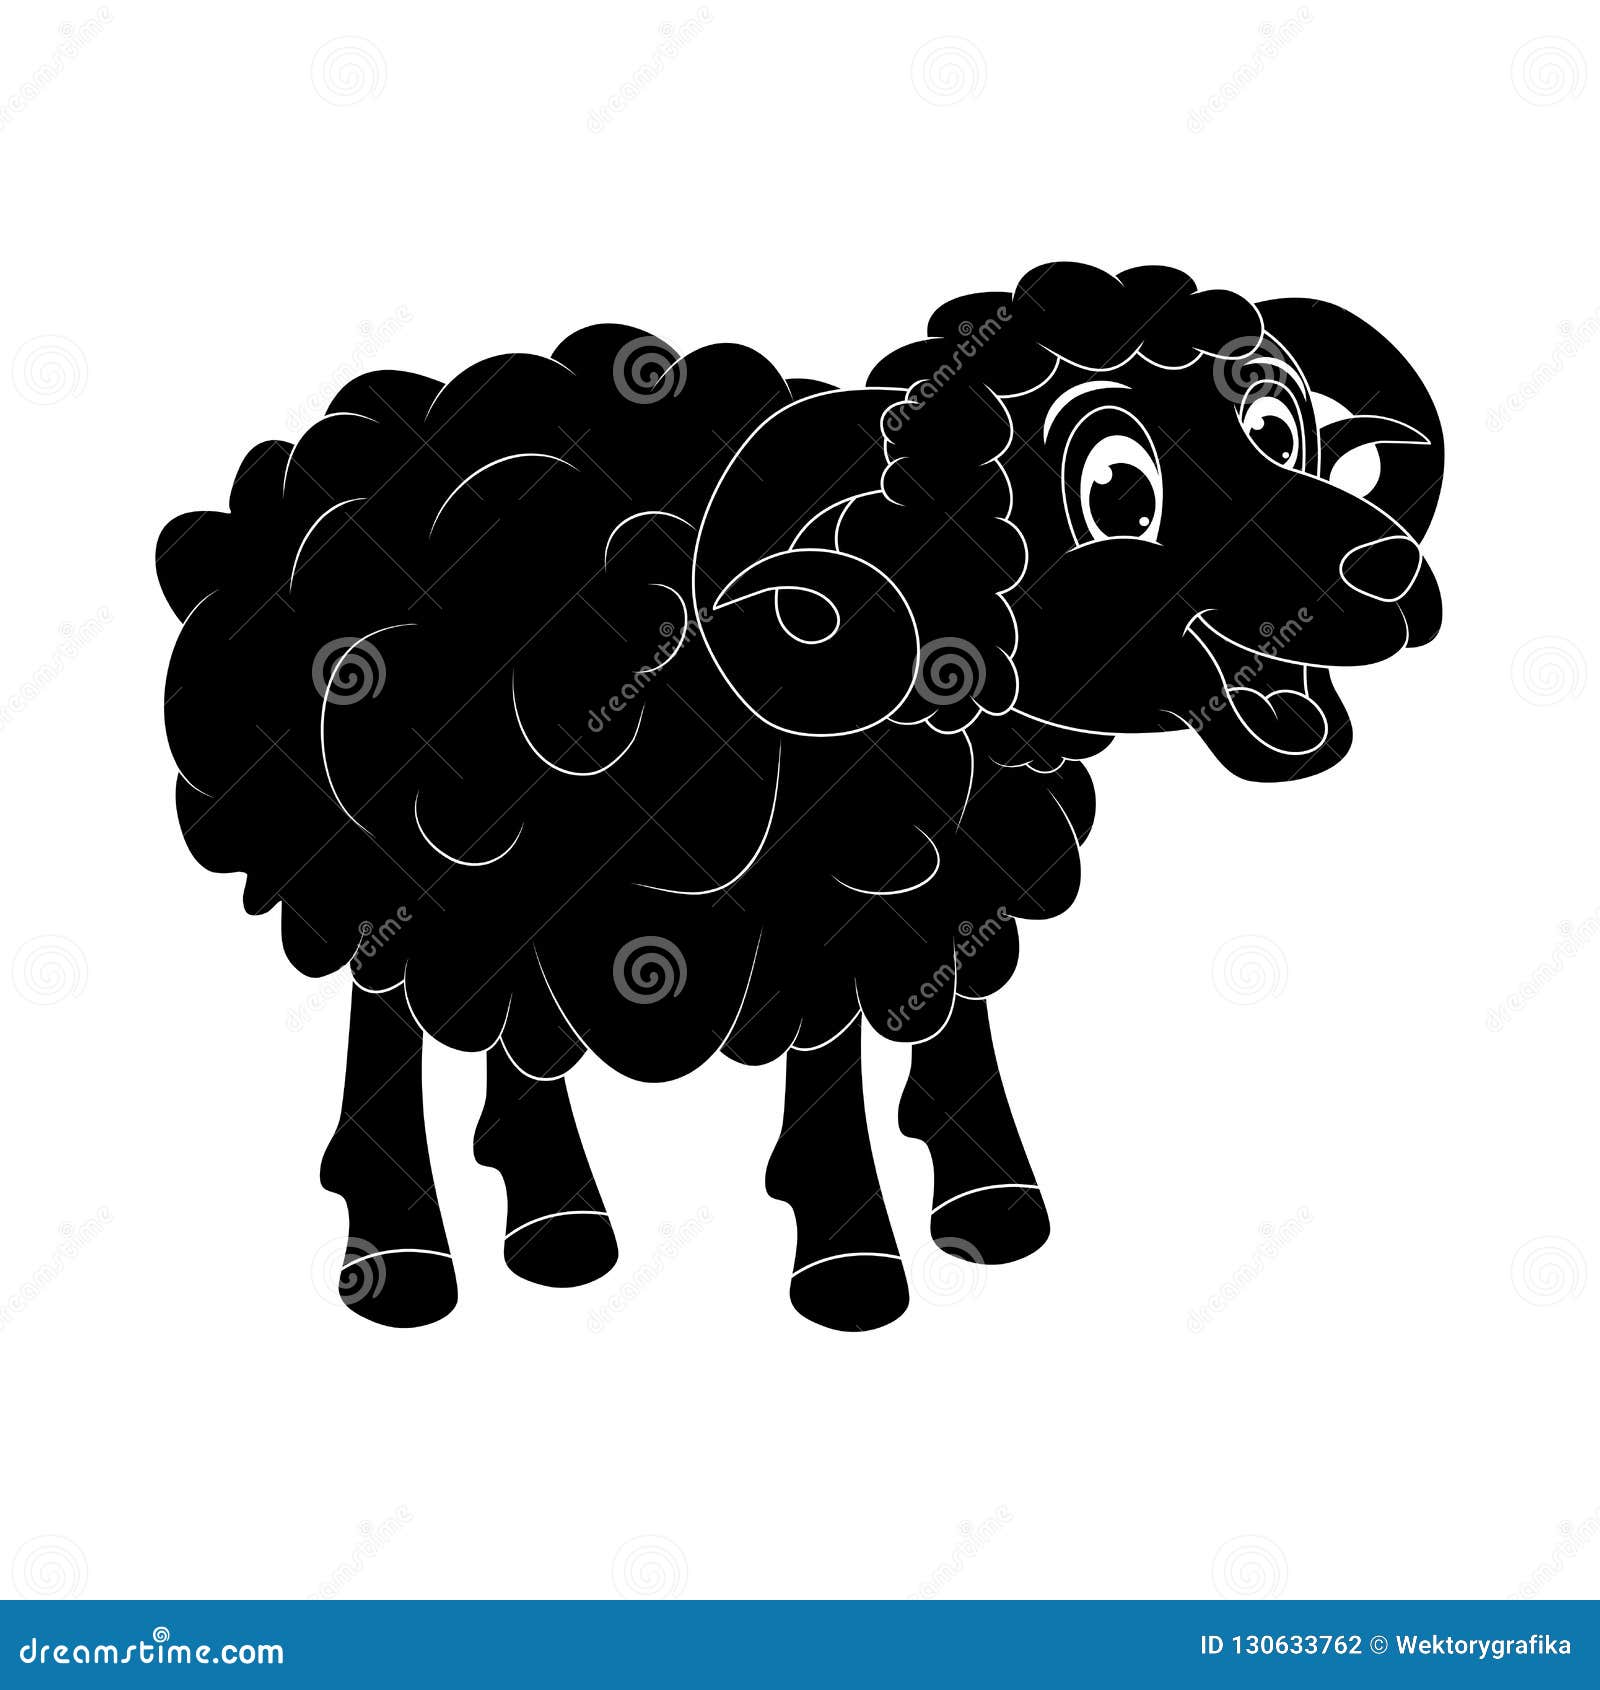 Download Cartoon Silhouette Ram Design Isolated On White Background ...